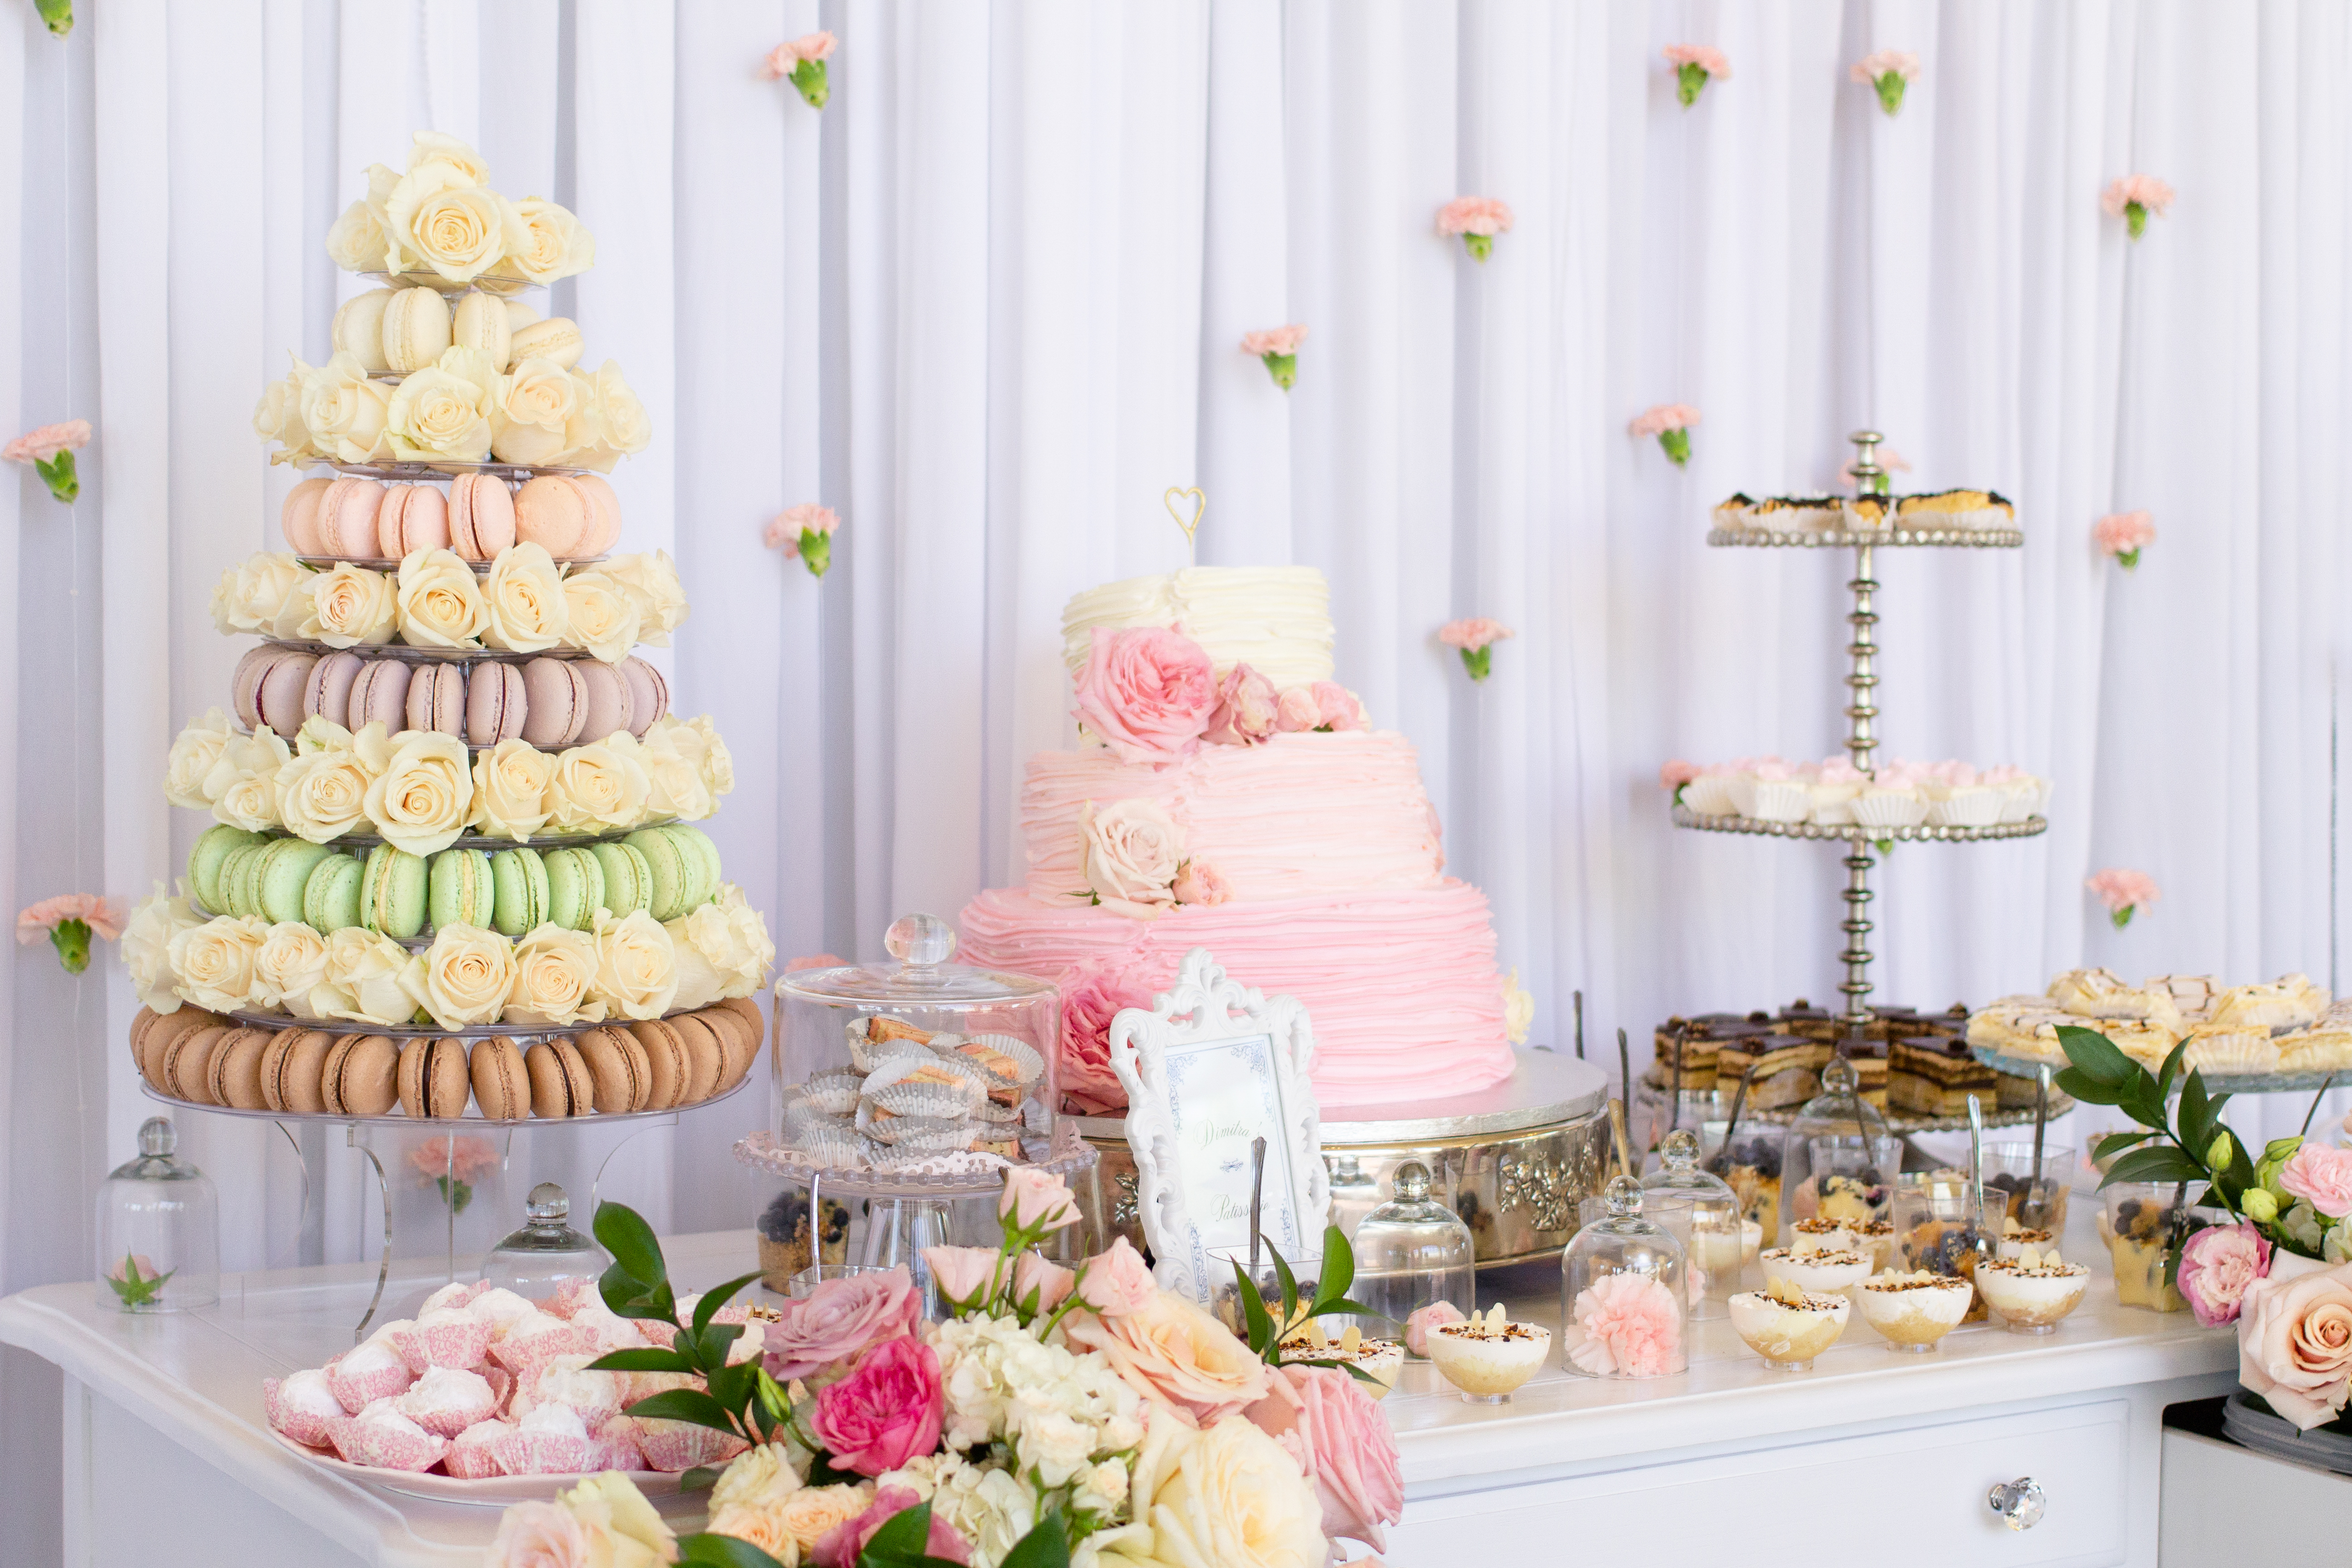 Wedding traditions: cake or dessert table. Luxury wedding blush and white dessert table